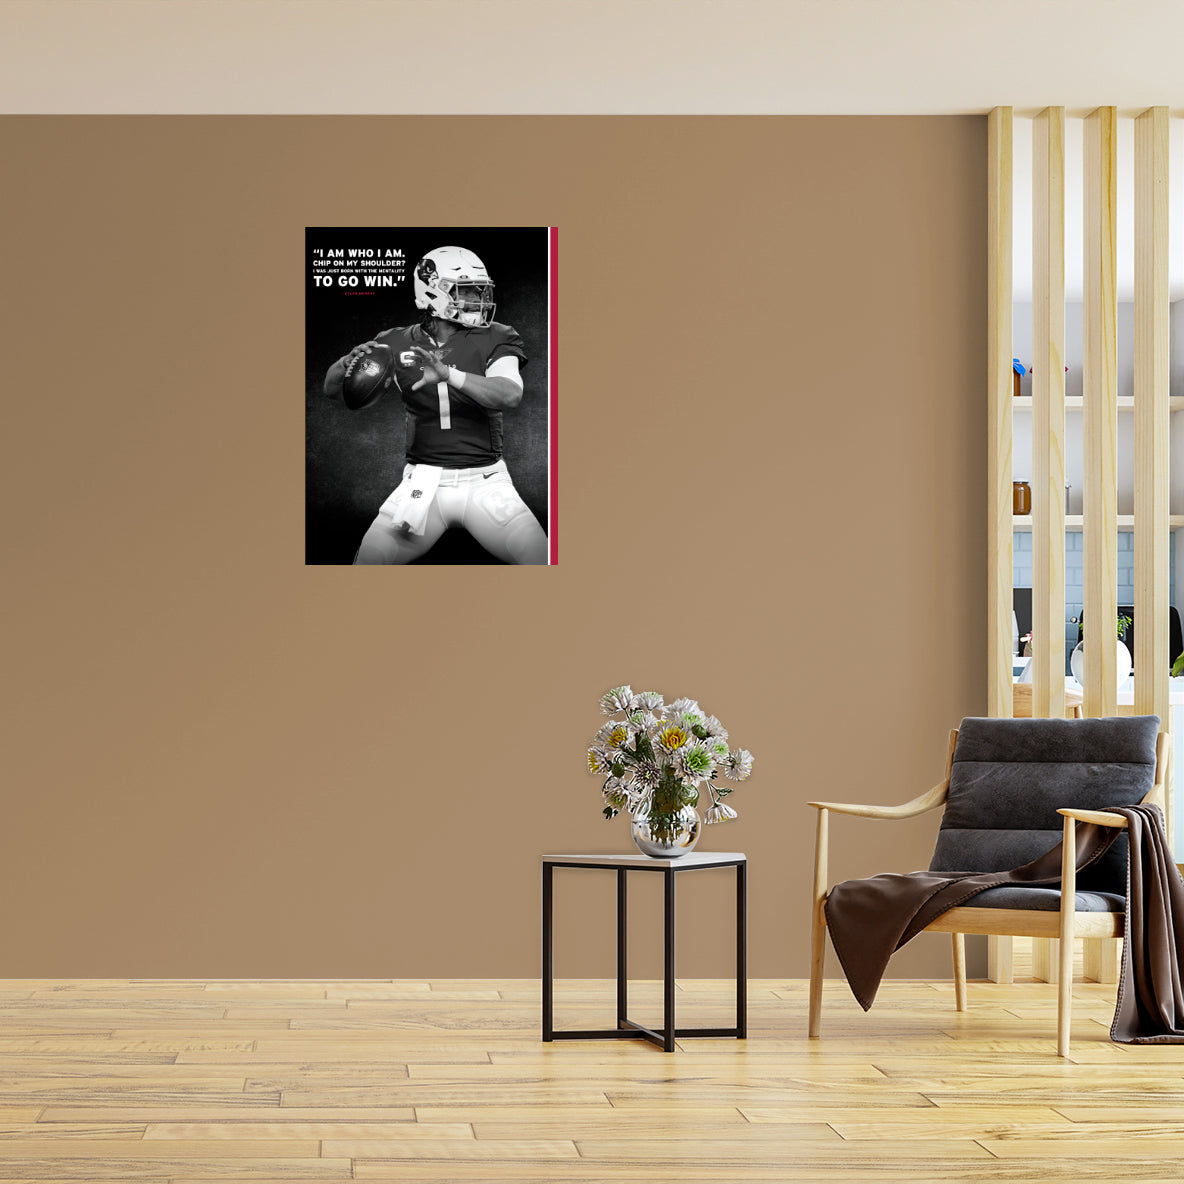 Arizona Cardinals: Kyler Murray Inspirational Poster - Officially Licensed NFL Removable Adhesive Decal